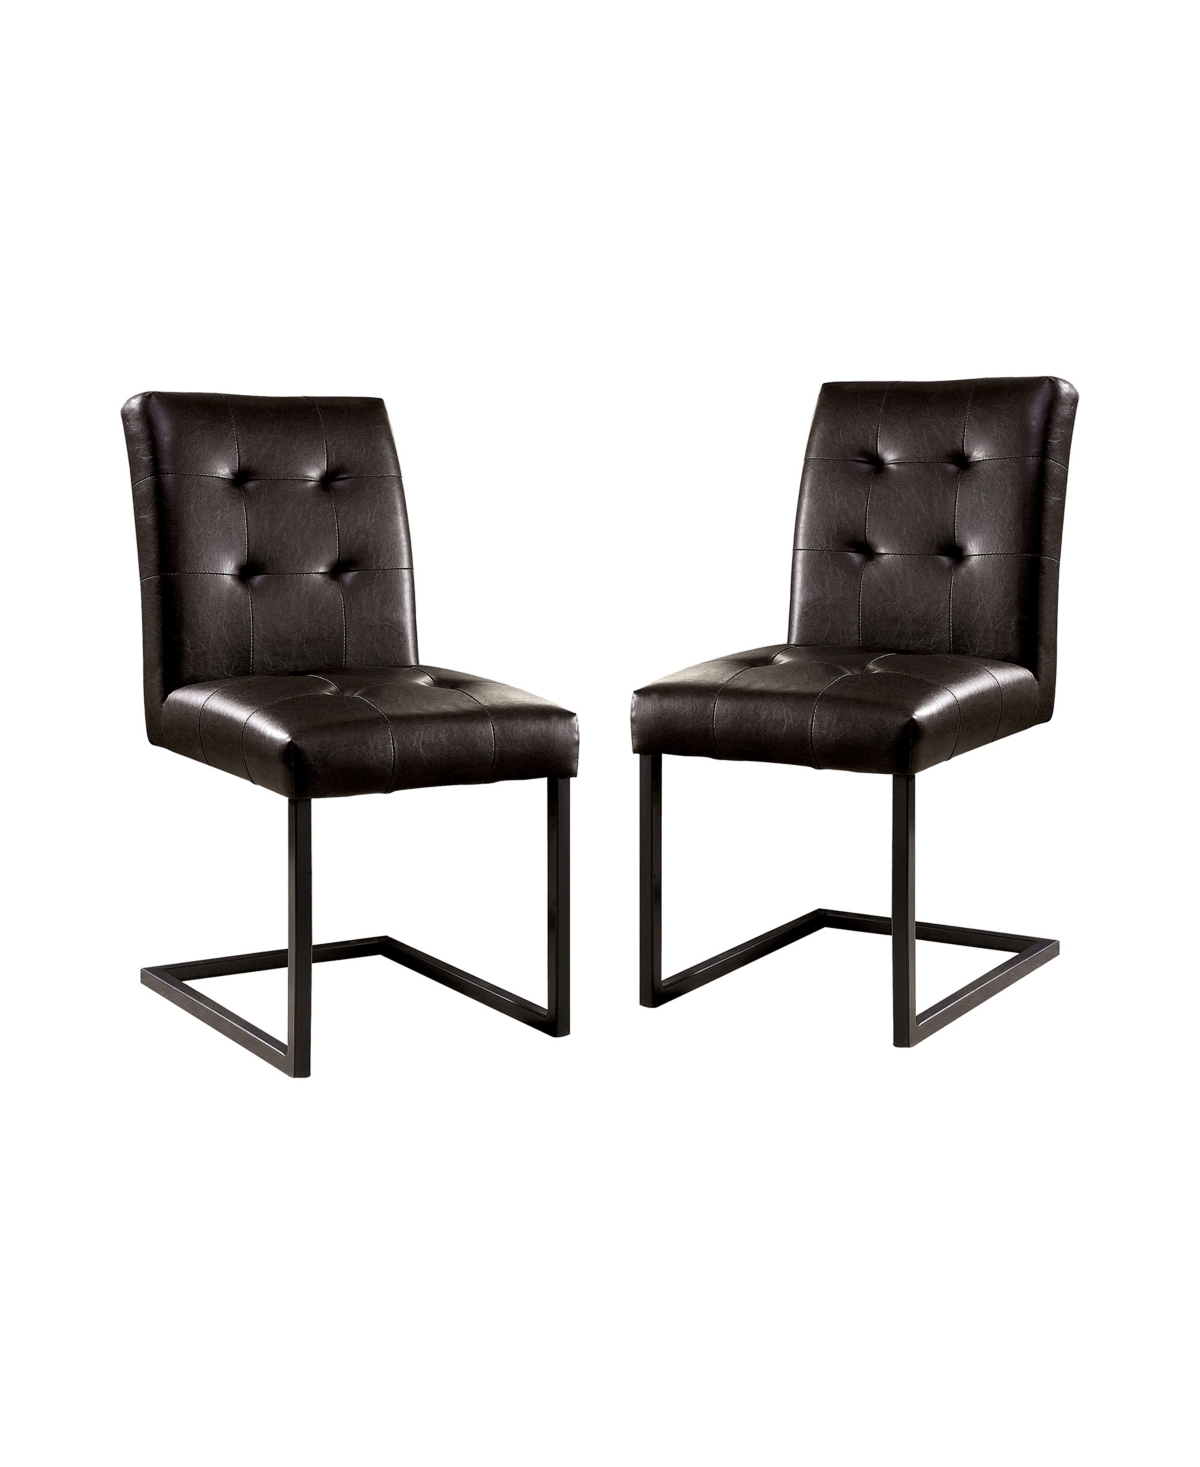 of America Hannet Tufted Side Chair- Set of 2